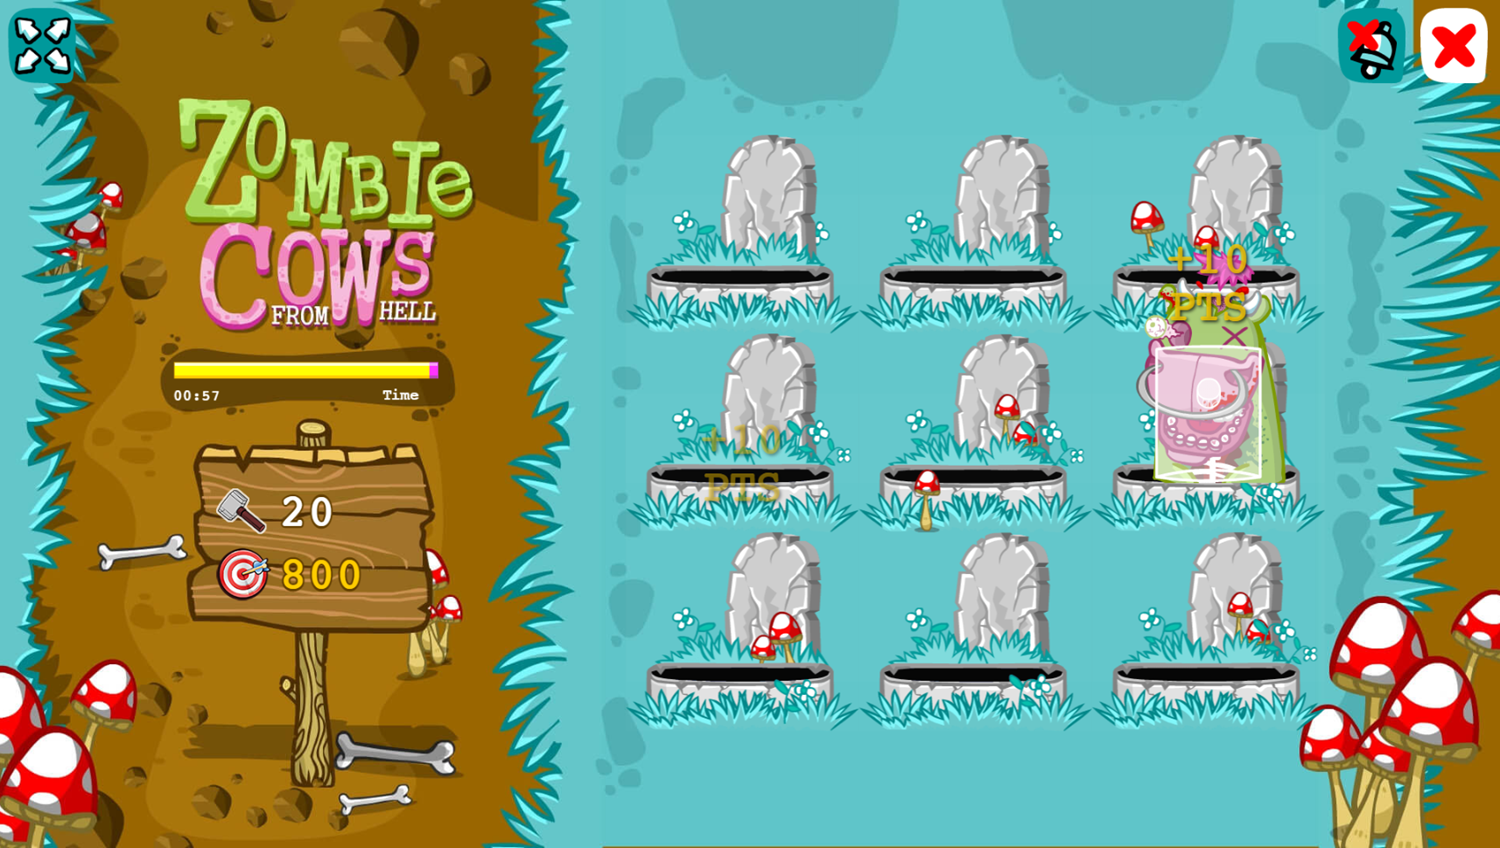 Zombie Cows From Hell Game Level Start Screenshot.